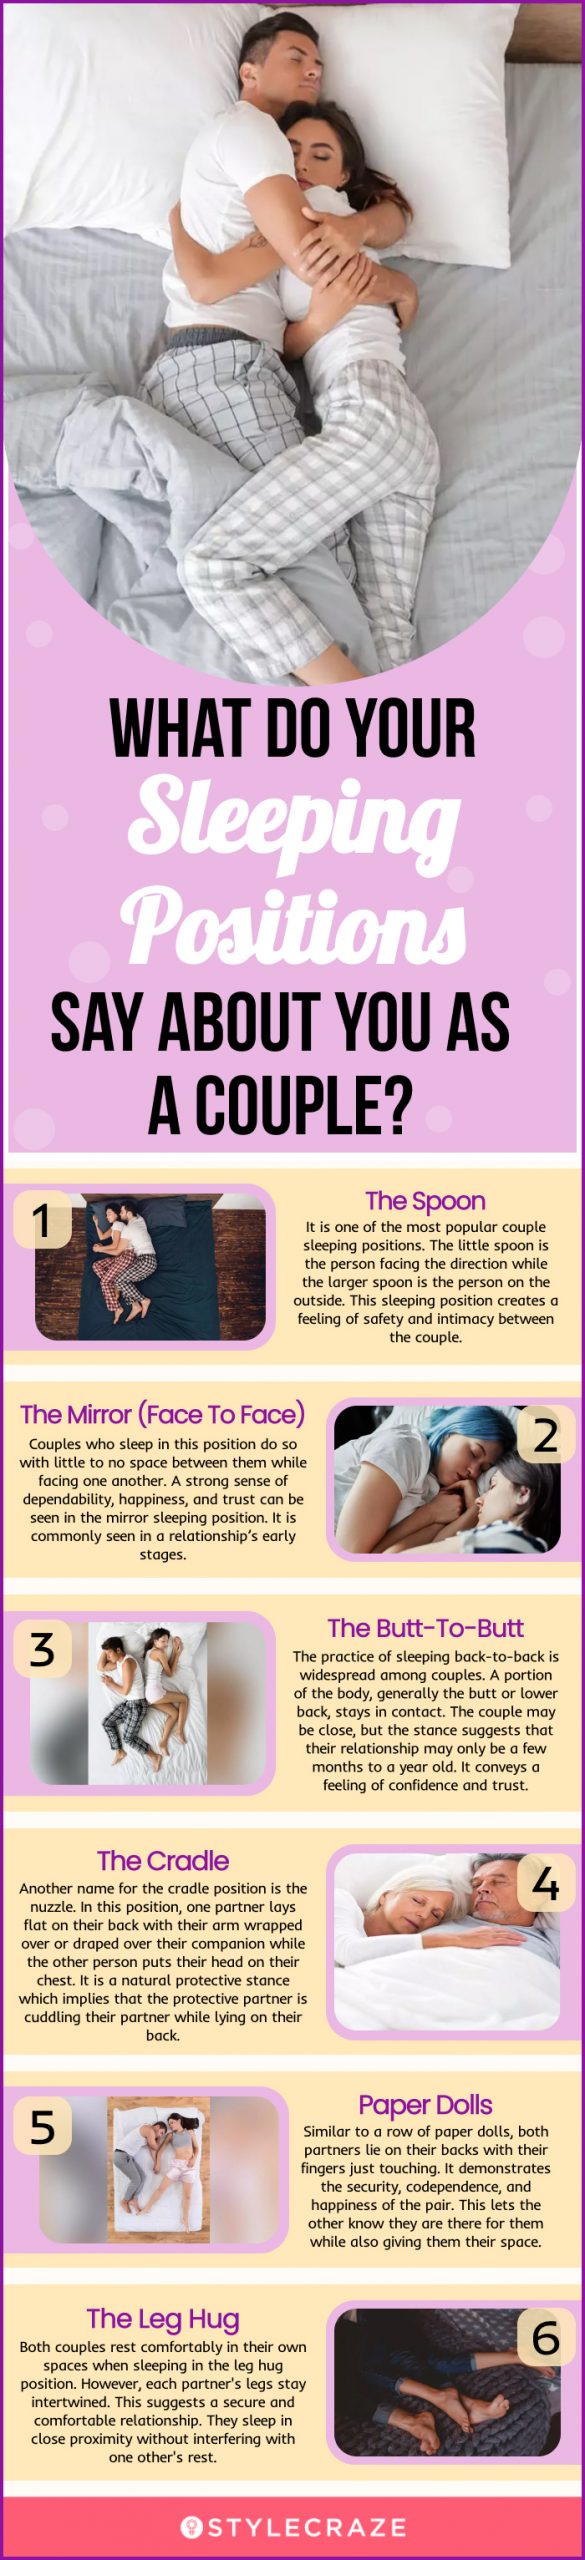 what do your sleeping positions say about you as a couple (infographic)